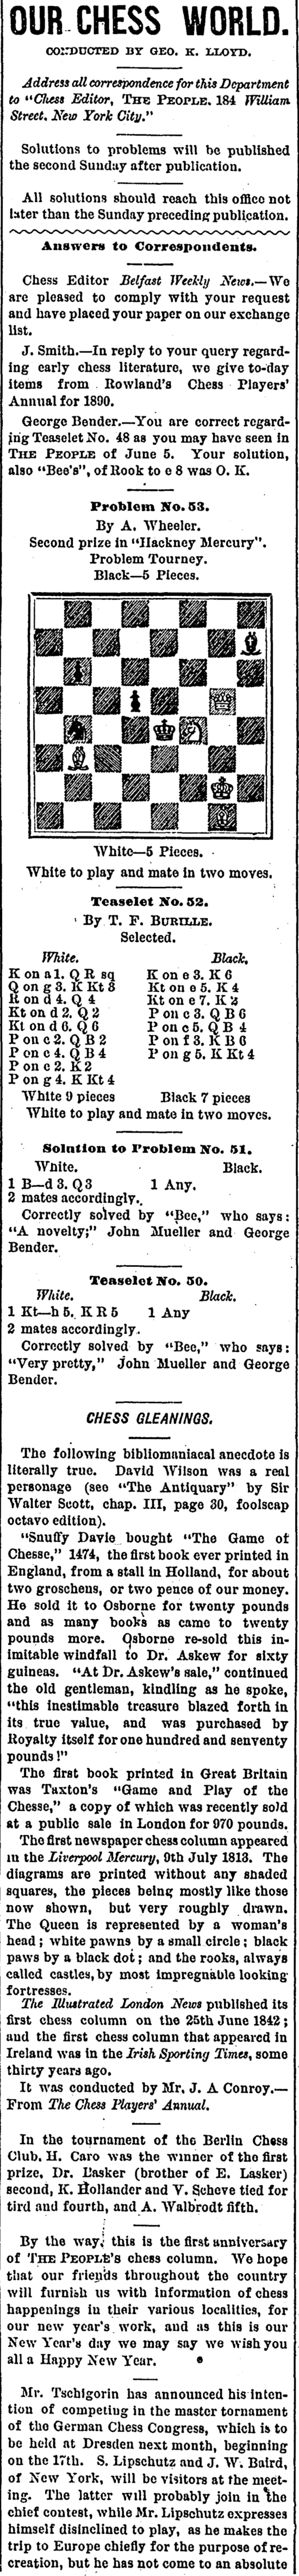 1892.06.12-01 New York People.png